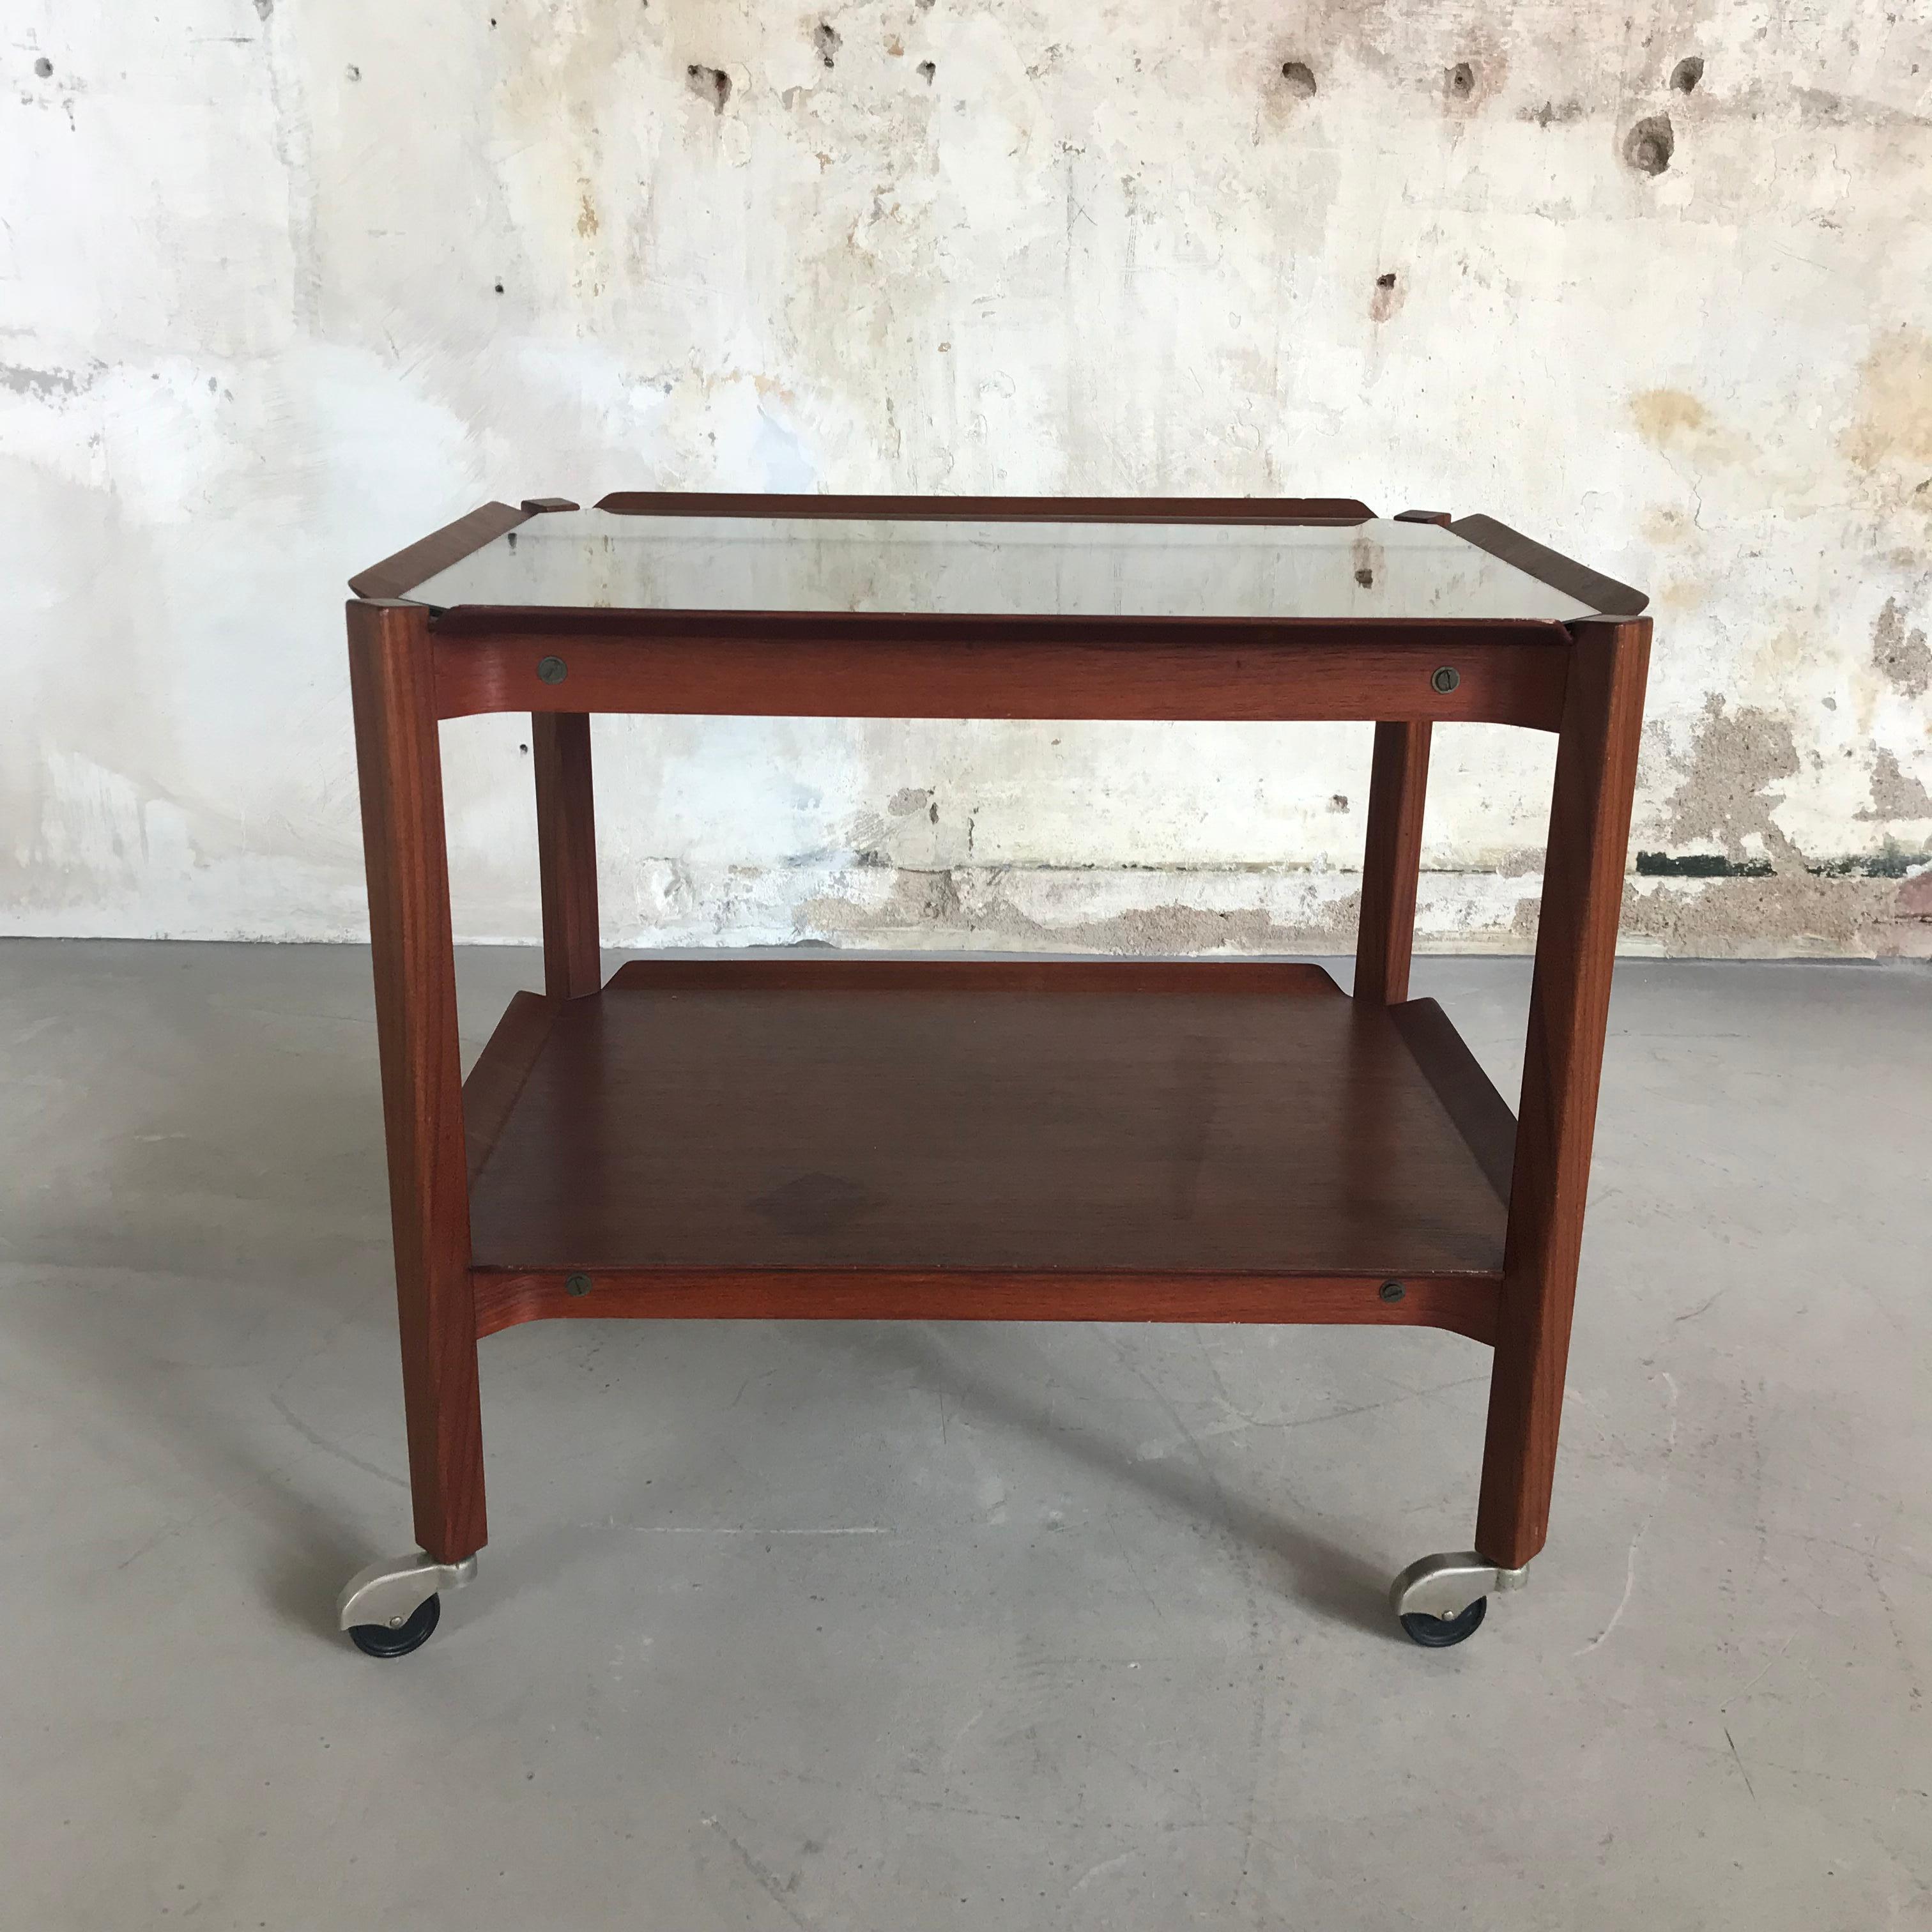 Hard to find midcentury trolley in totally original state. Designed by Cees Braakman in 1959 and produced by UMS Pastoe. The trolley has a solid teak frame and two plates with beautiful folded edges. Comes with original glass top, which is